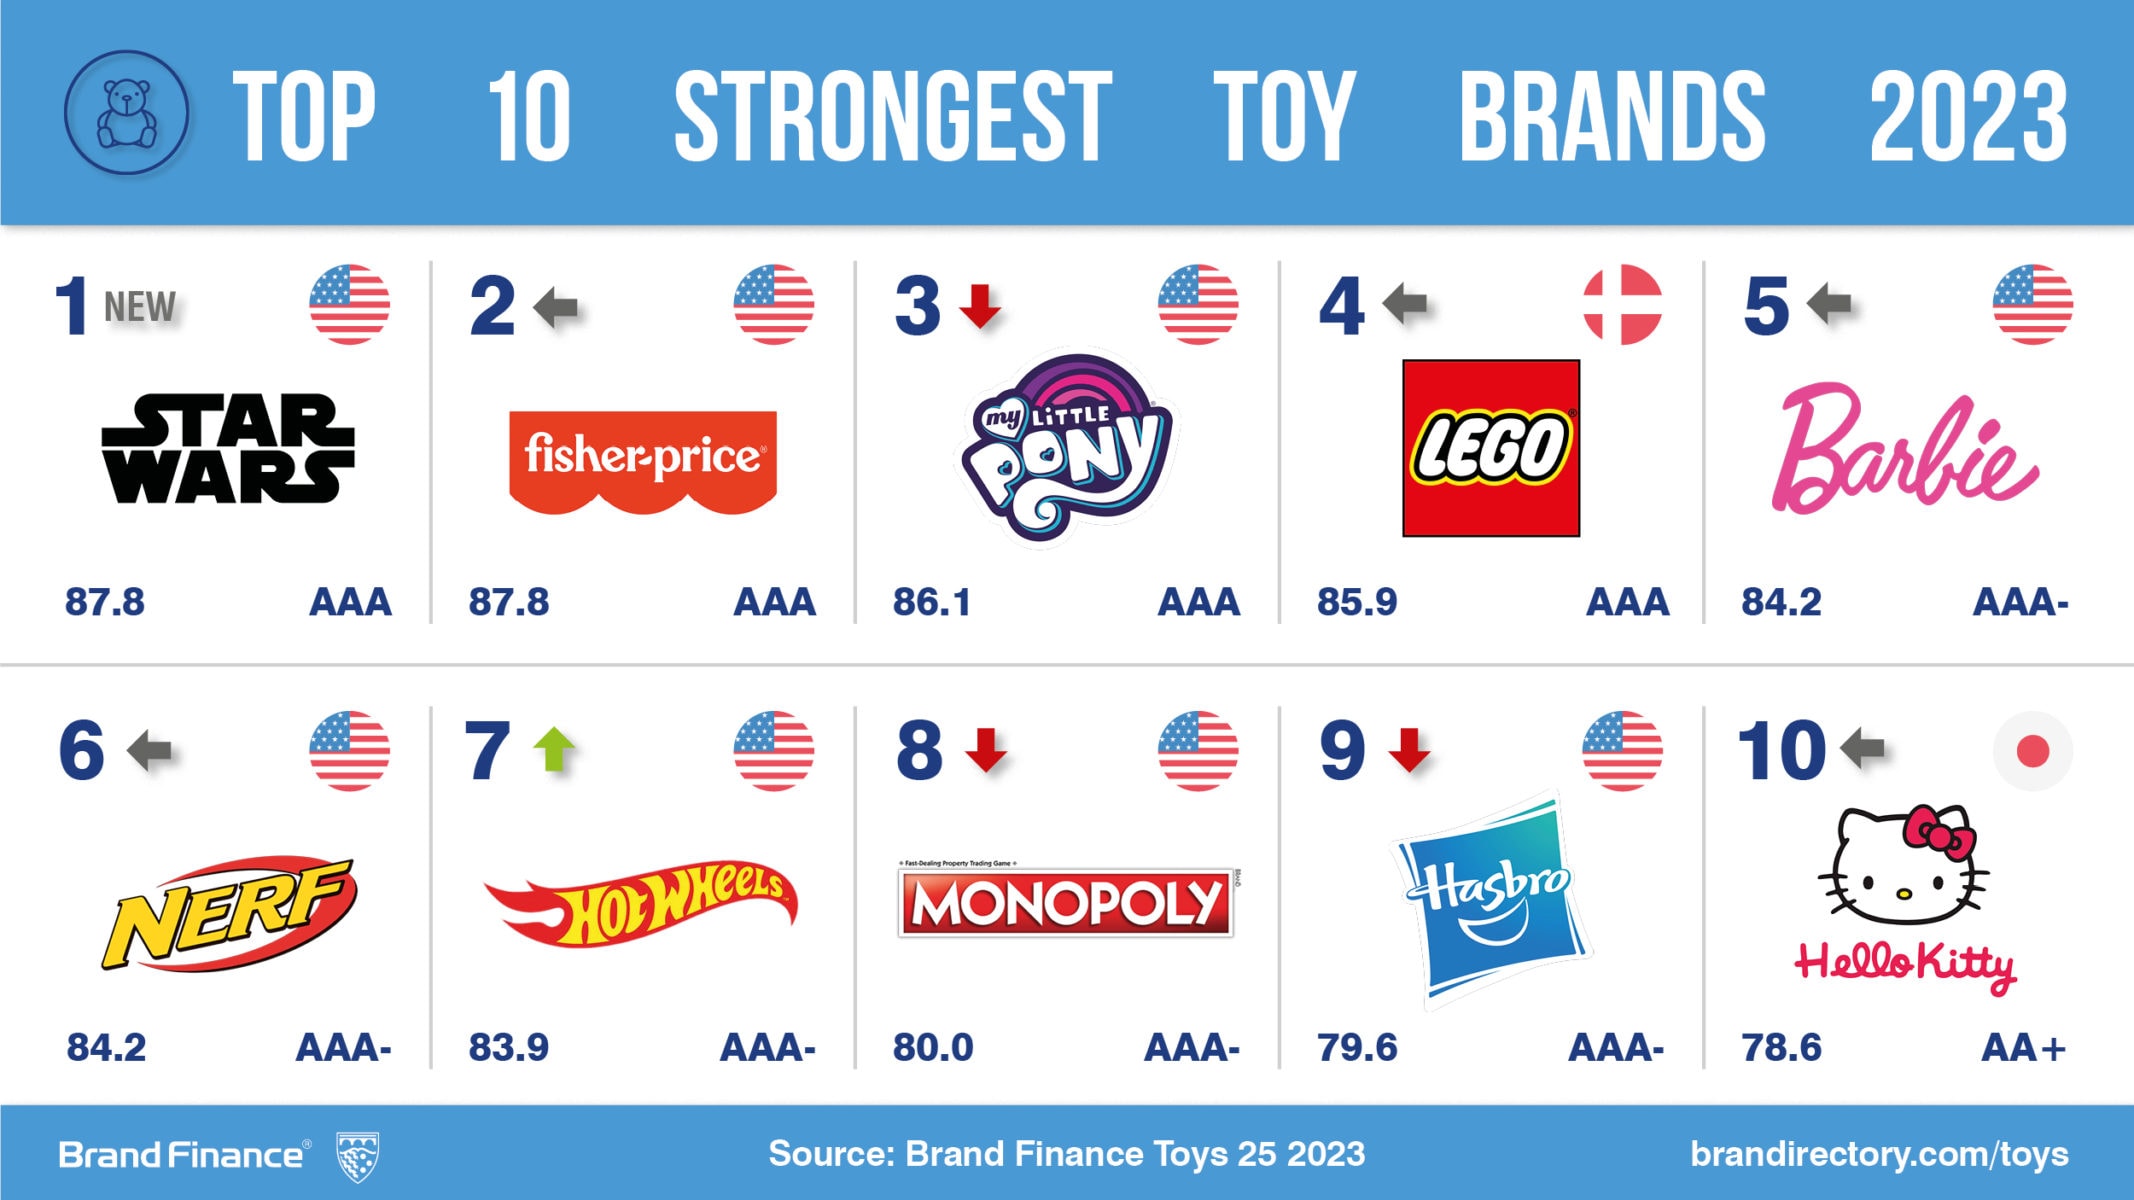 Toy brand values grow as post-pandemic play proliferates, Press Release